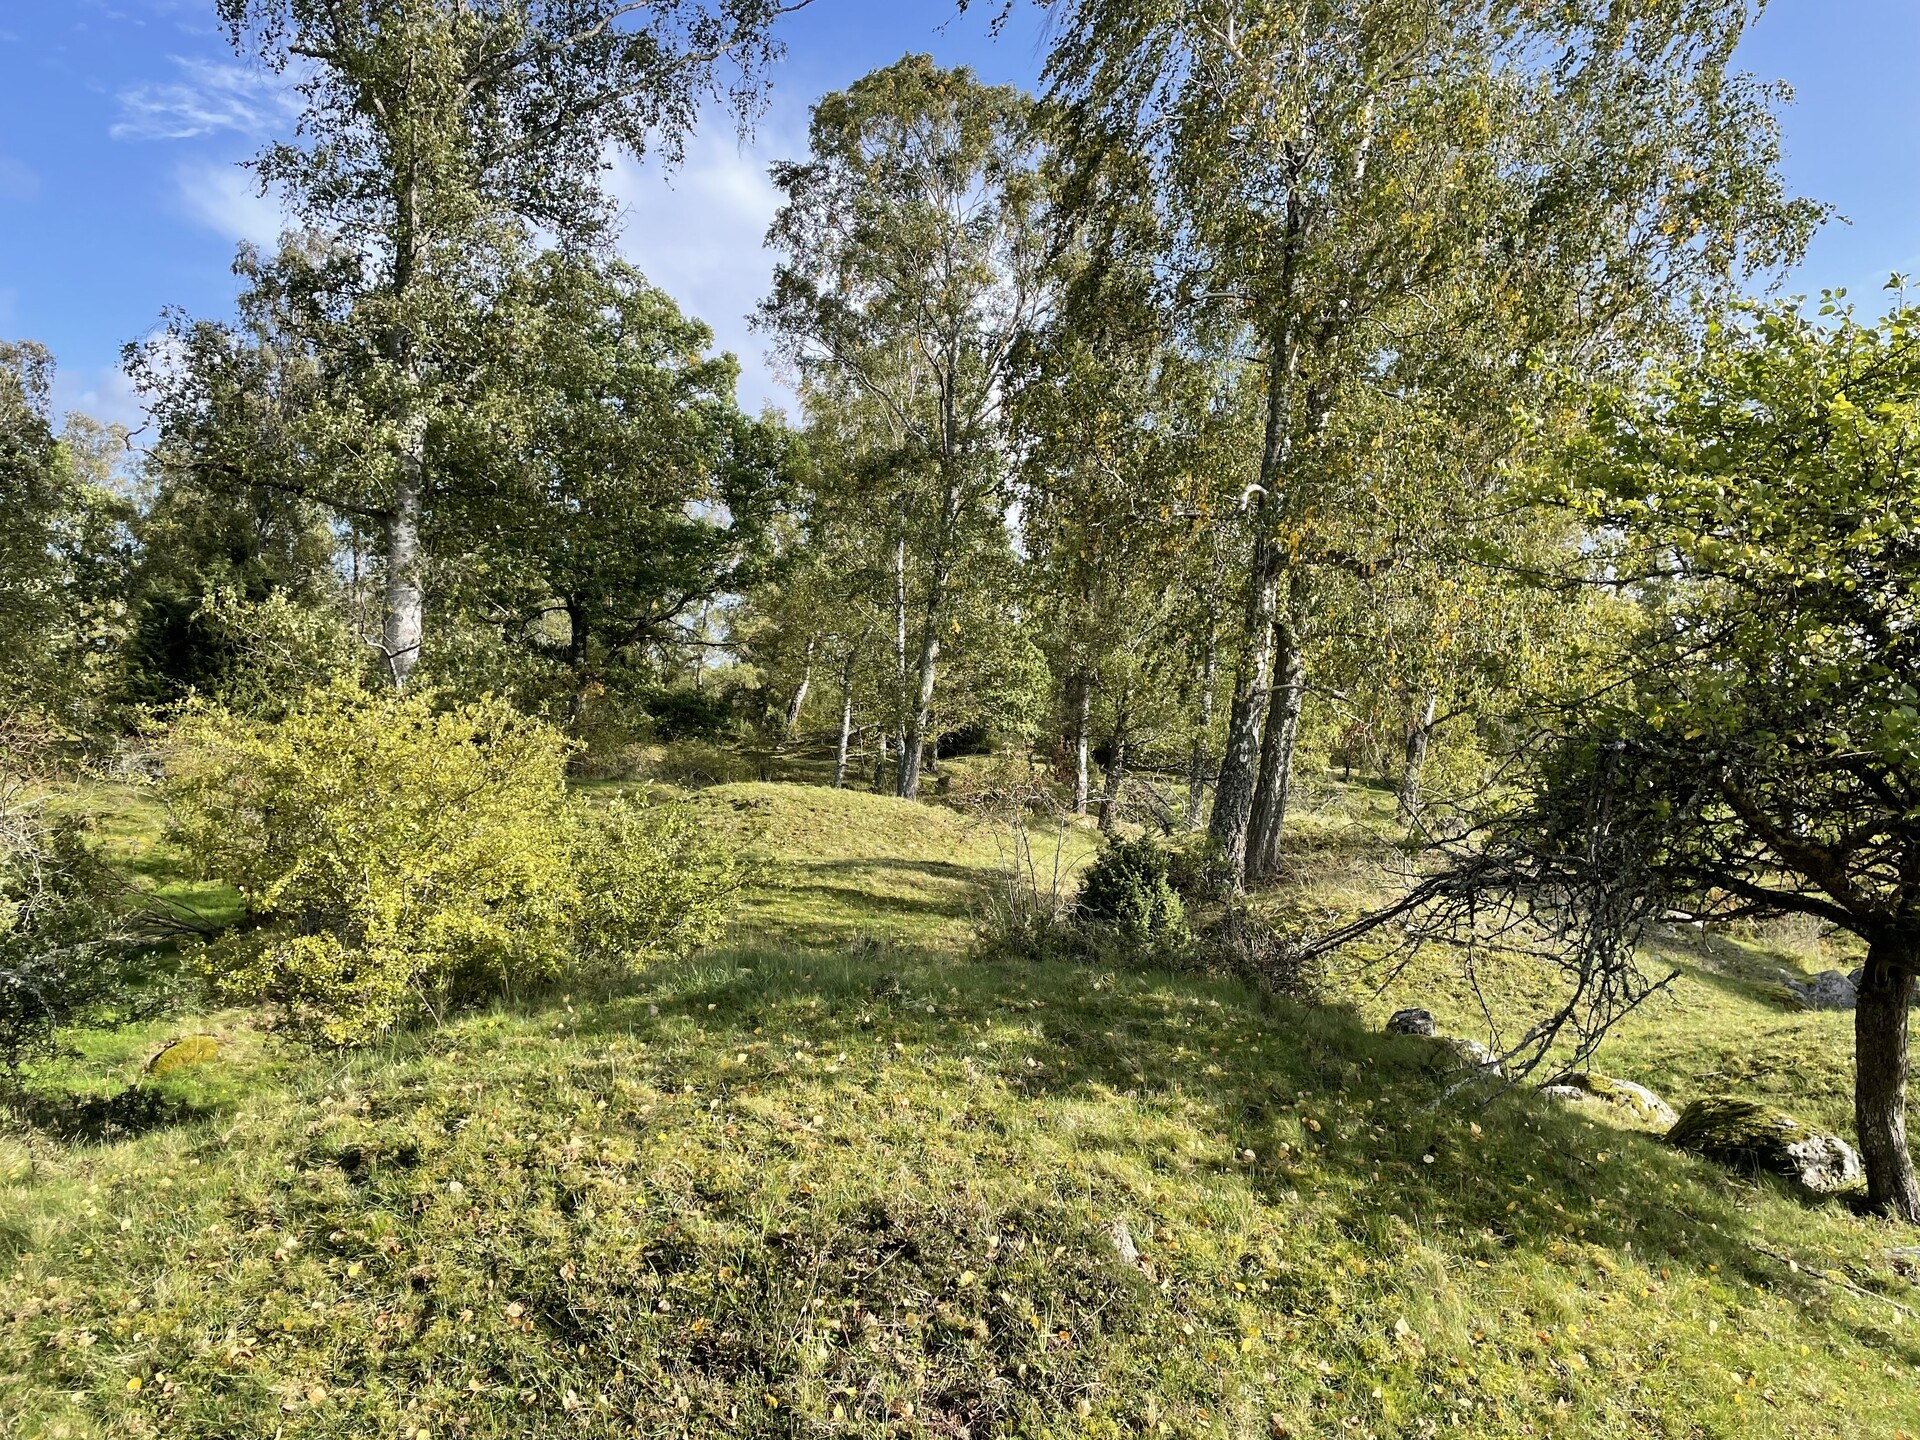 A typical Swedish forest with burial mounds scattered between the trees